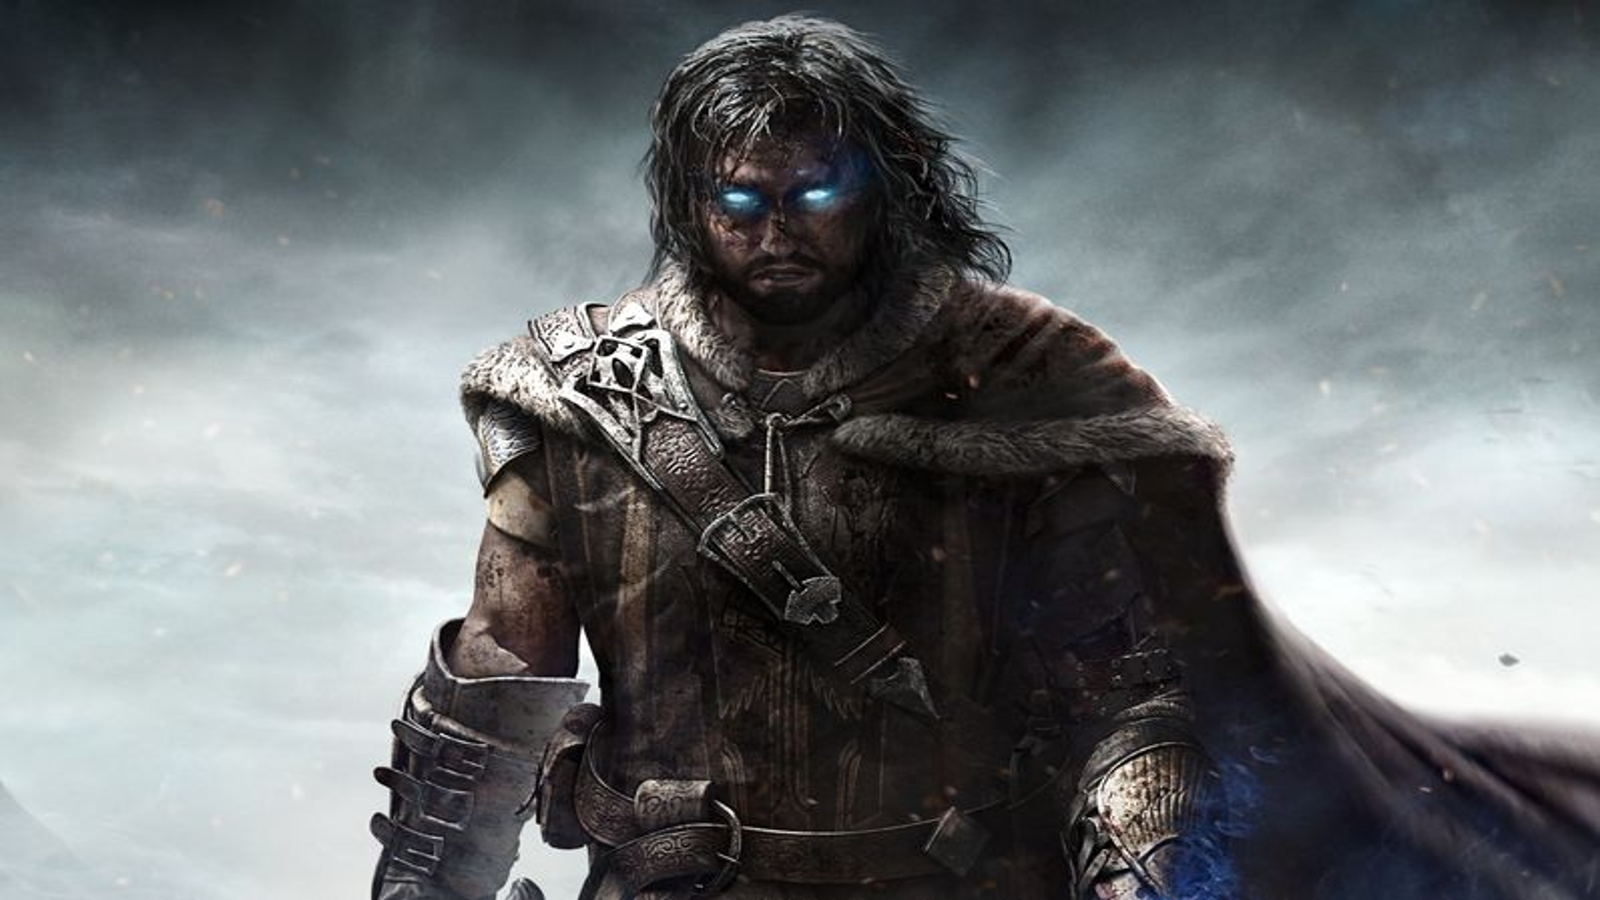 Middle Earth: Shadow of Mordor in 2021